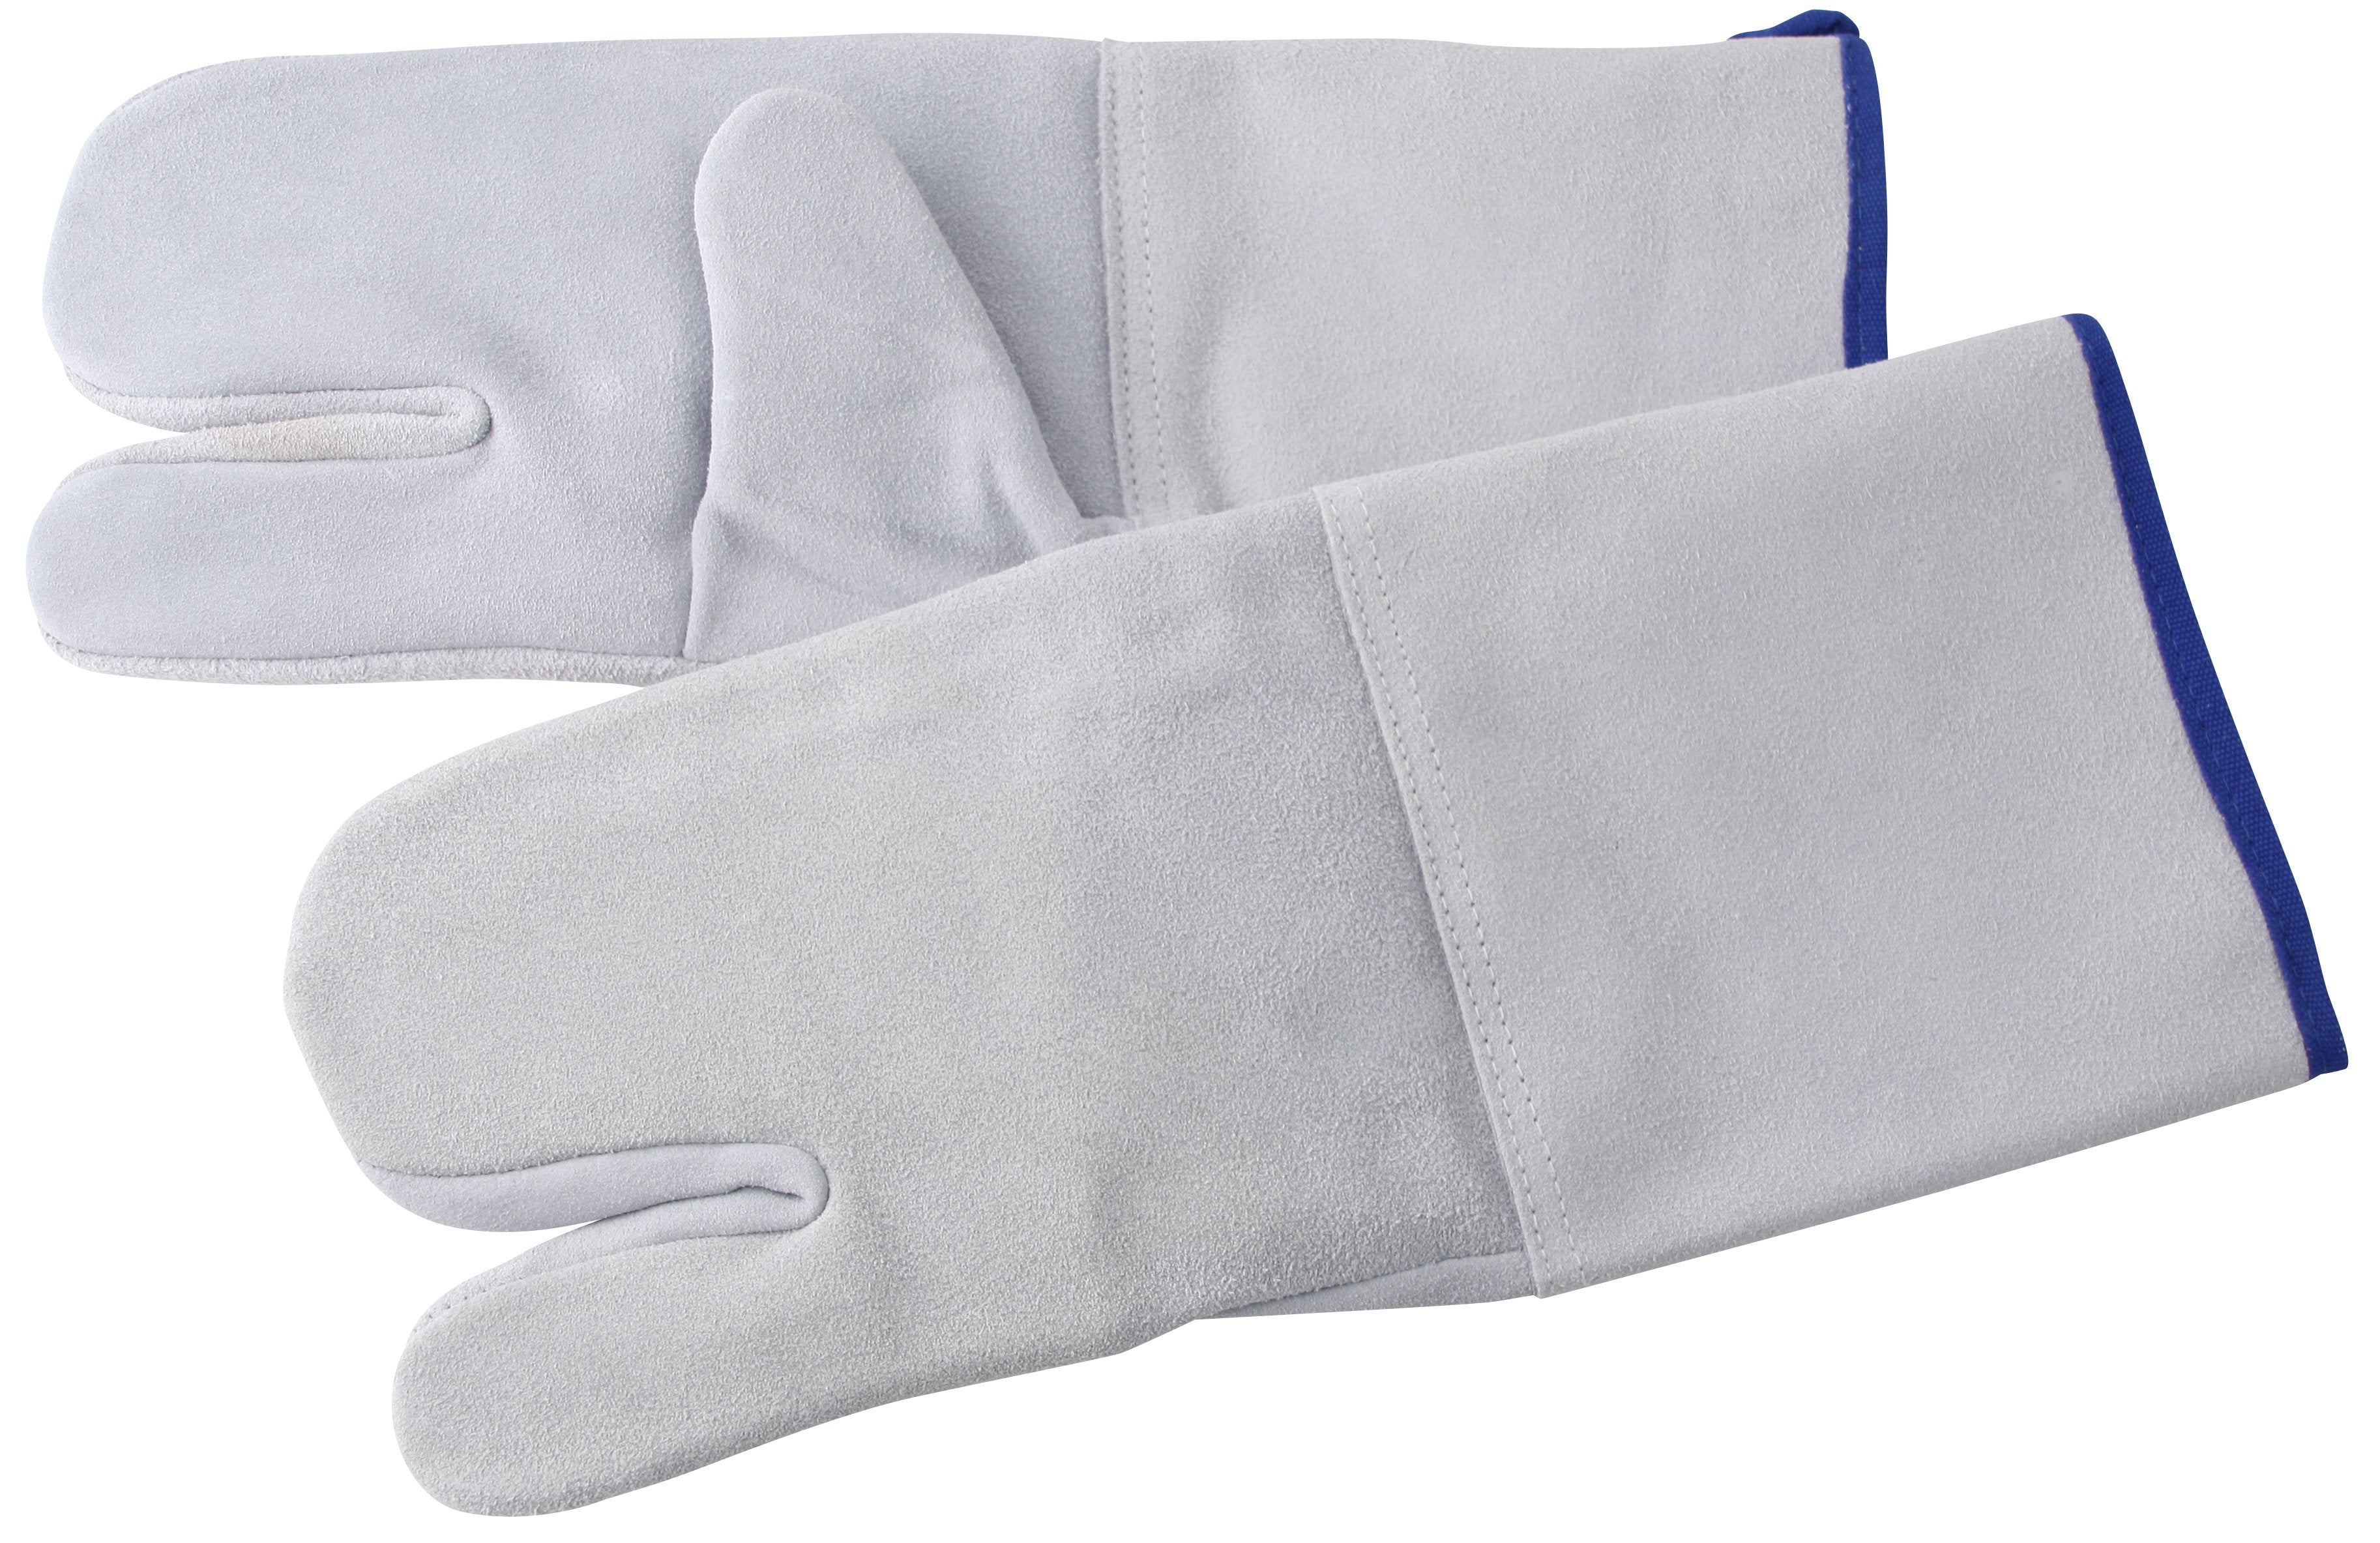 FMprofessional Oven Gloves, Leather, One Size